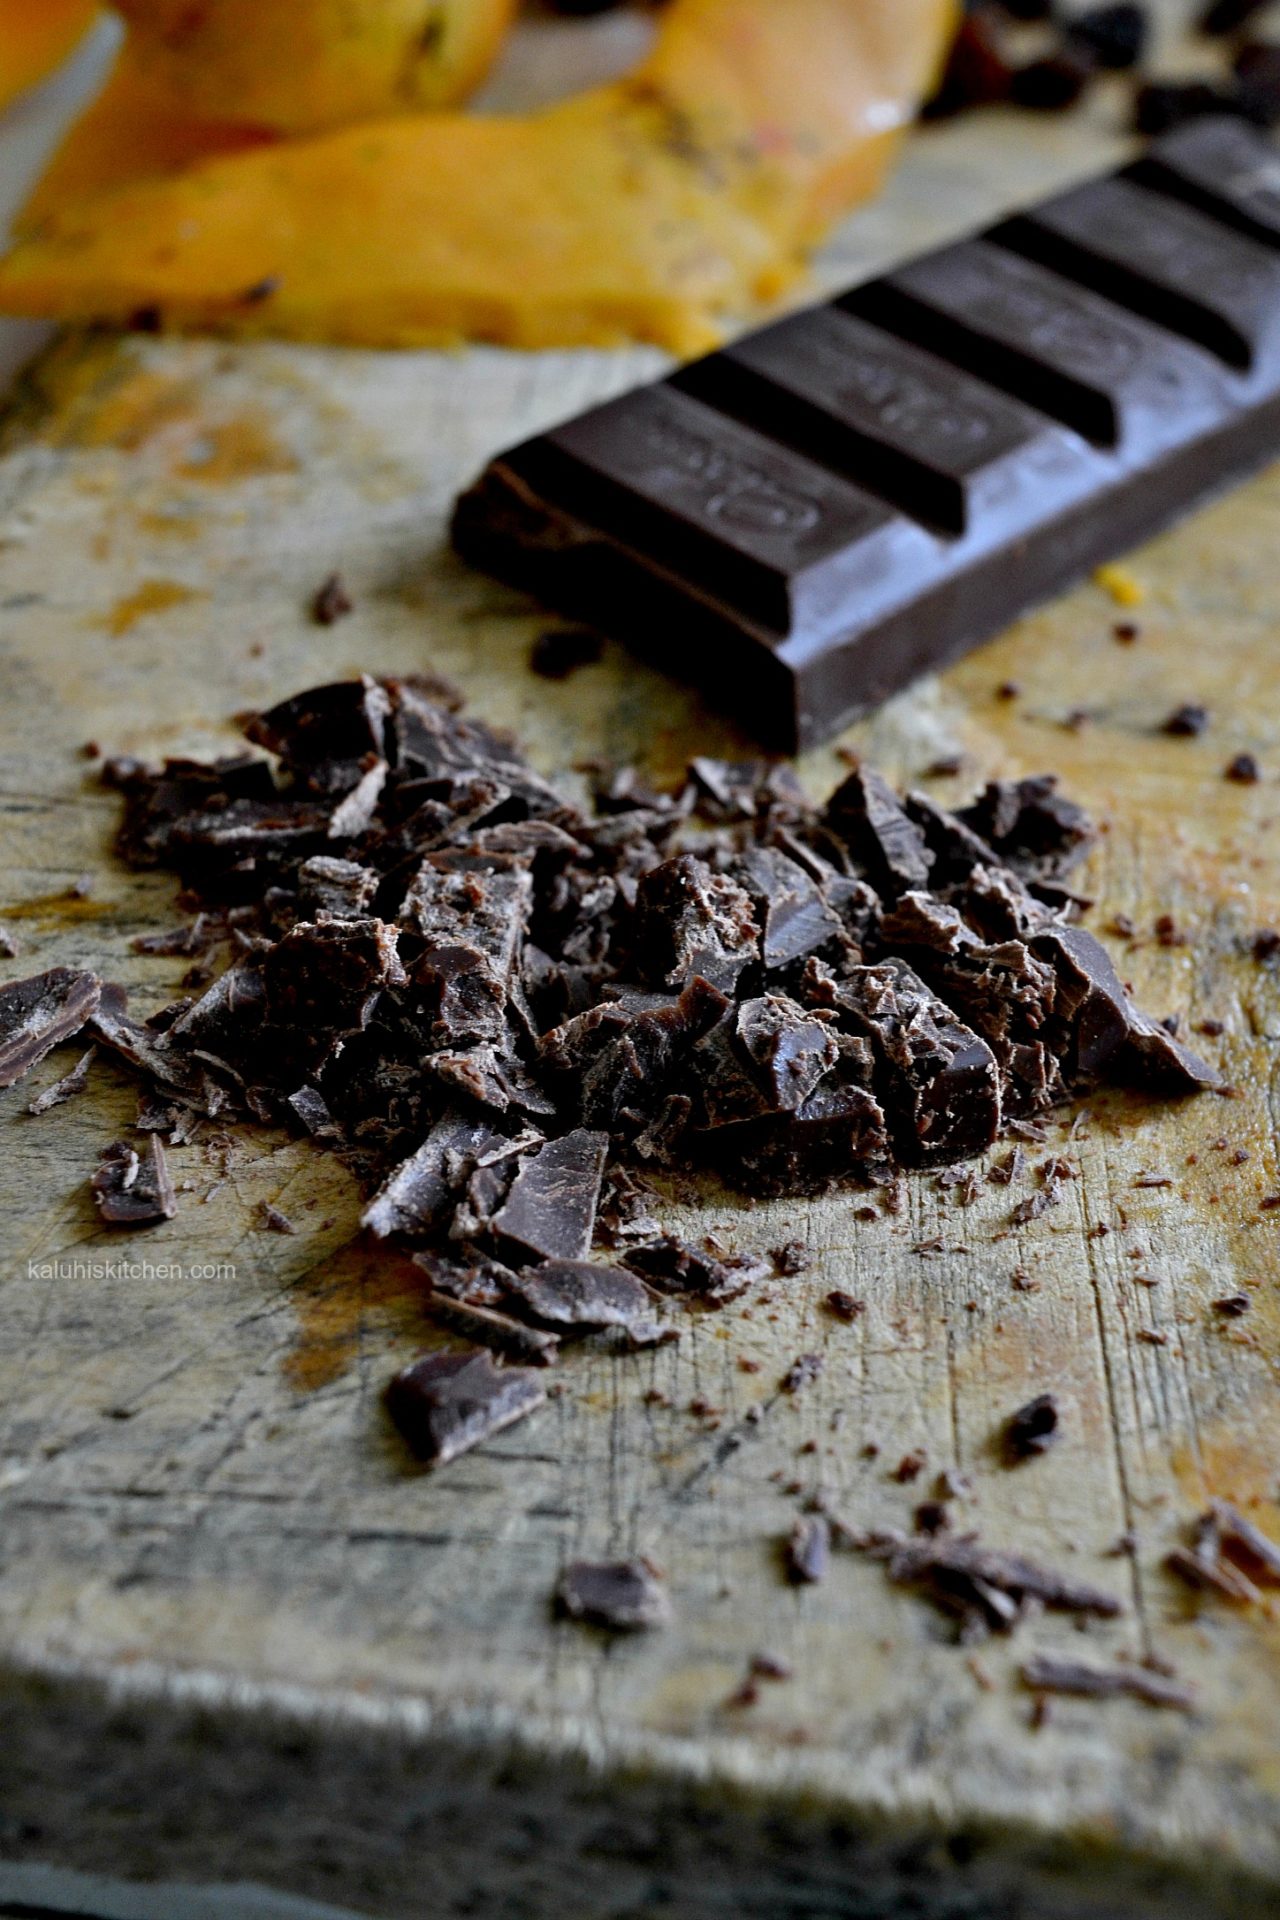 the best chocolate to incorporate in your desserts is dark chocolate since it is very pure and has more nutrients_dark chococlate_kaluhiskitchen.com